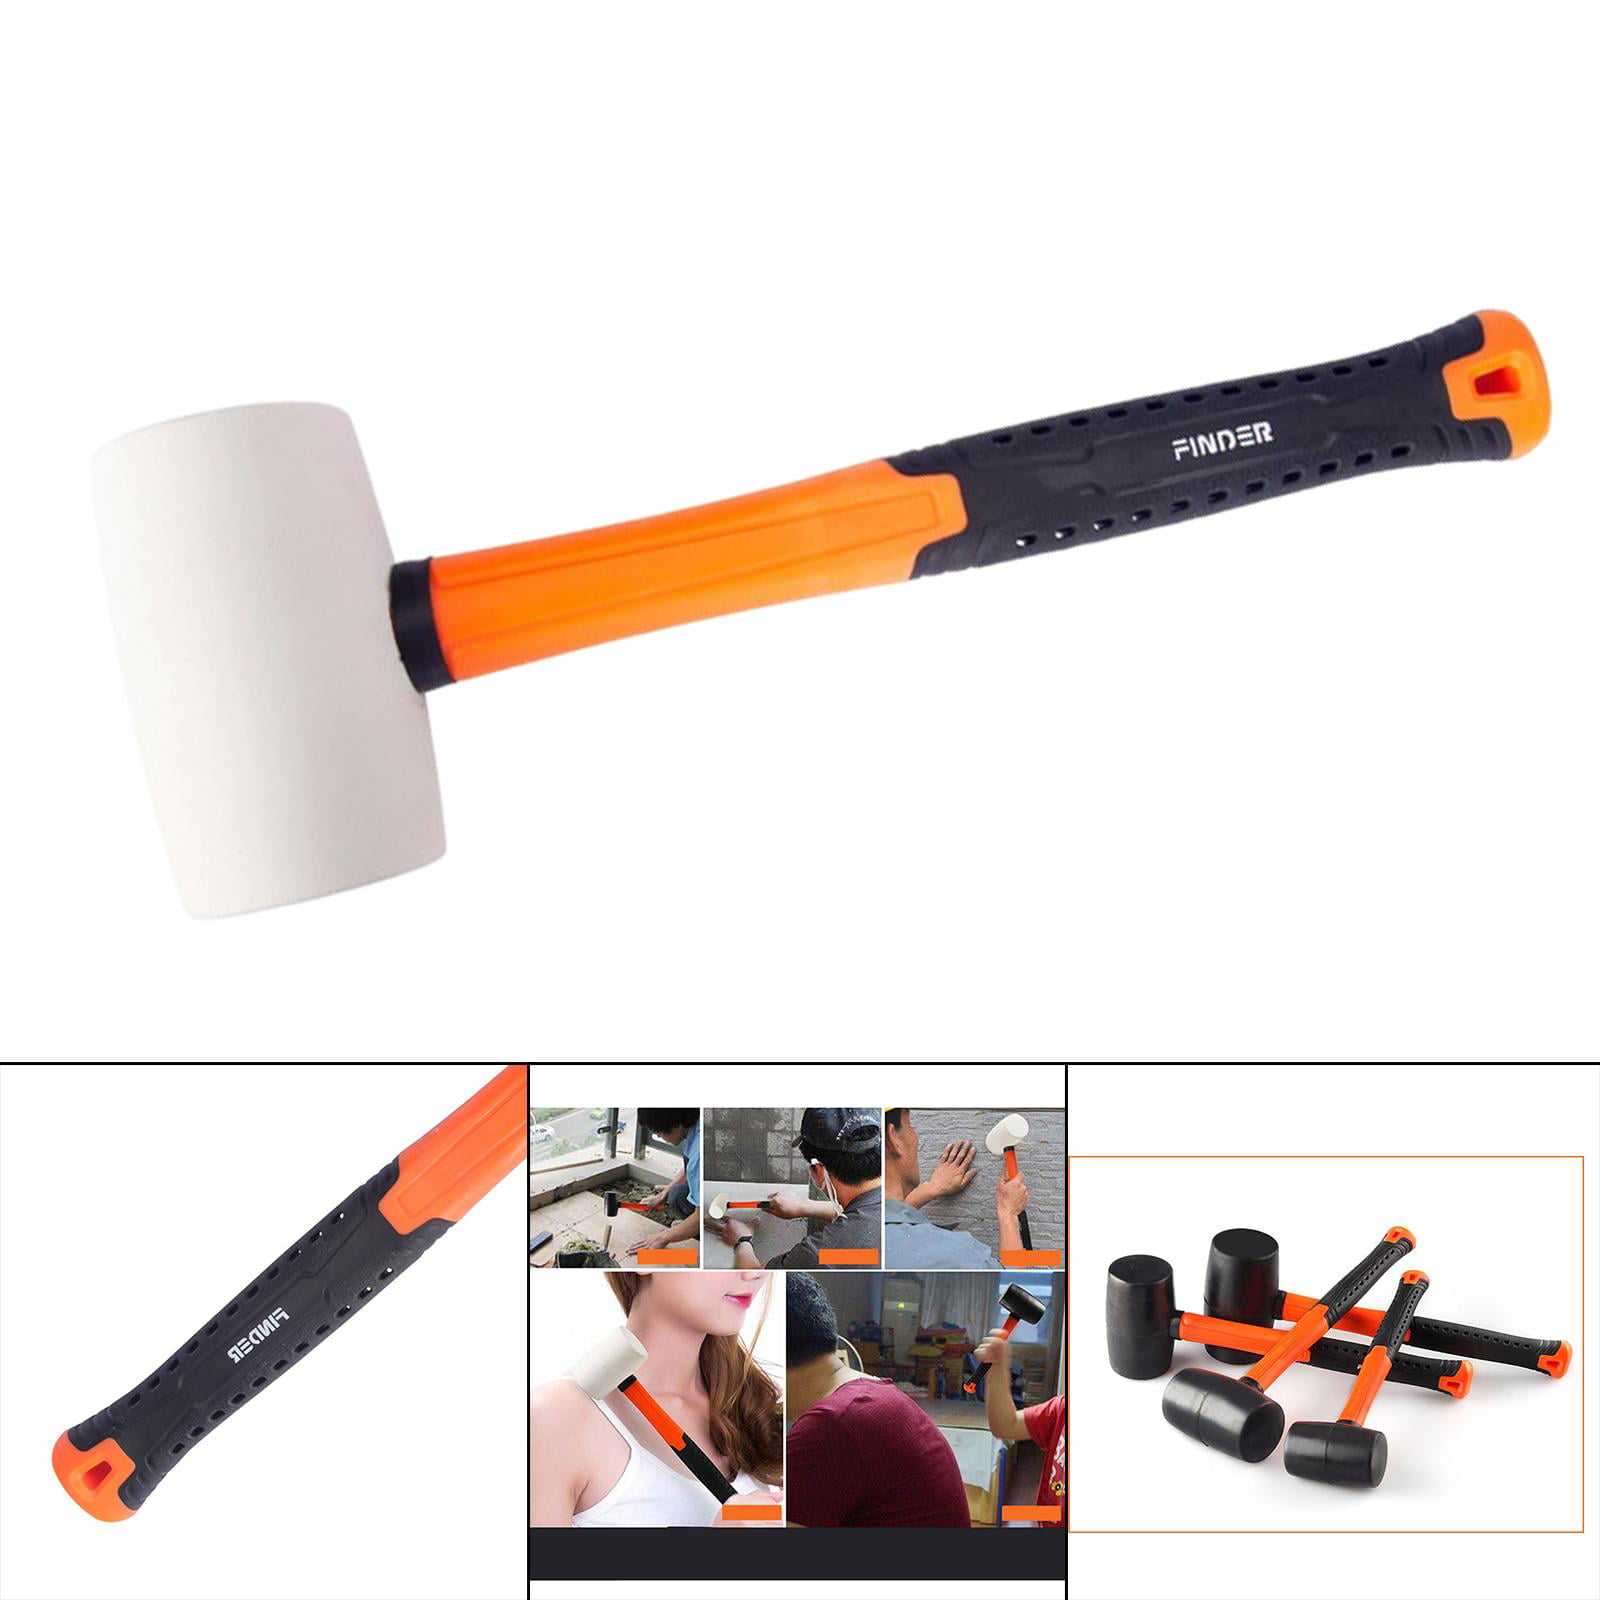 32oz RUBBER MALLET HIGH QUALITY CAMPING BUILDING TILING DIY HAMMER PAVING TOOL 